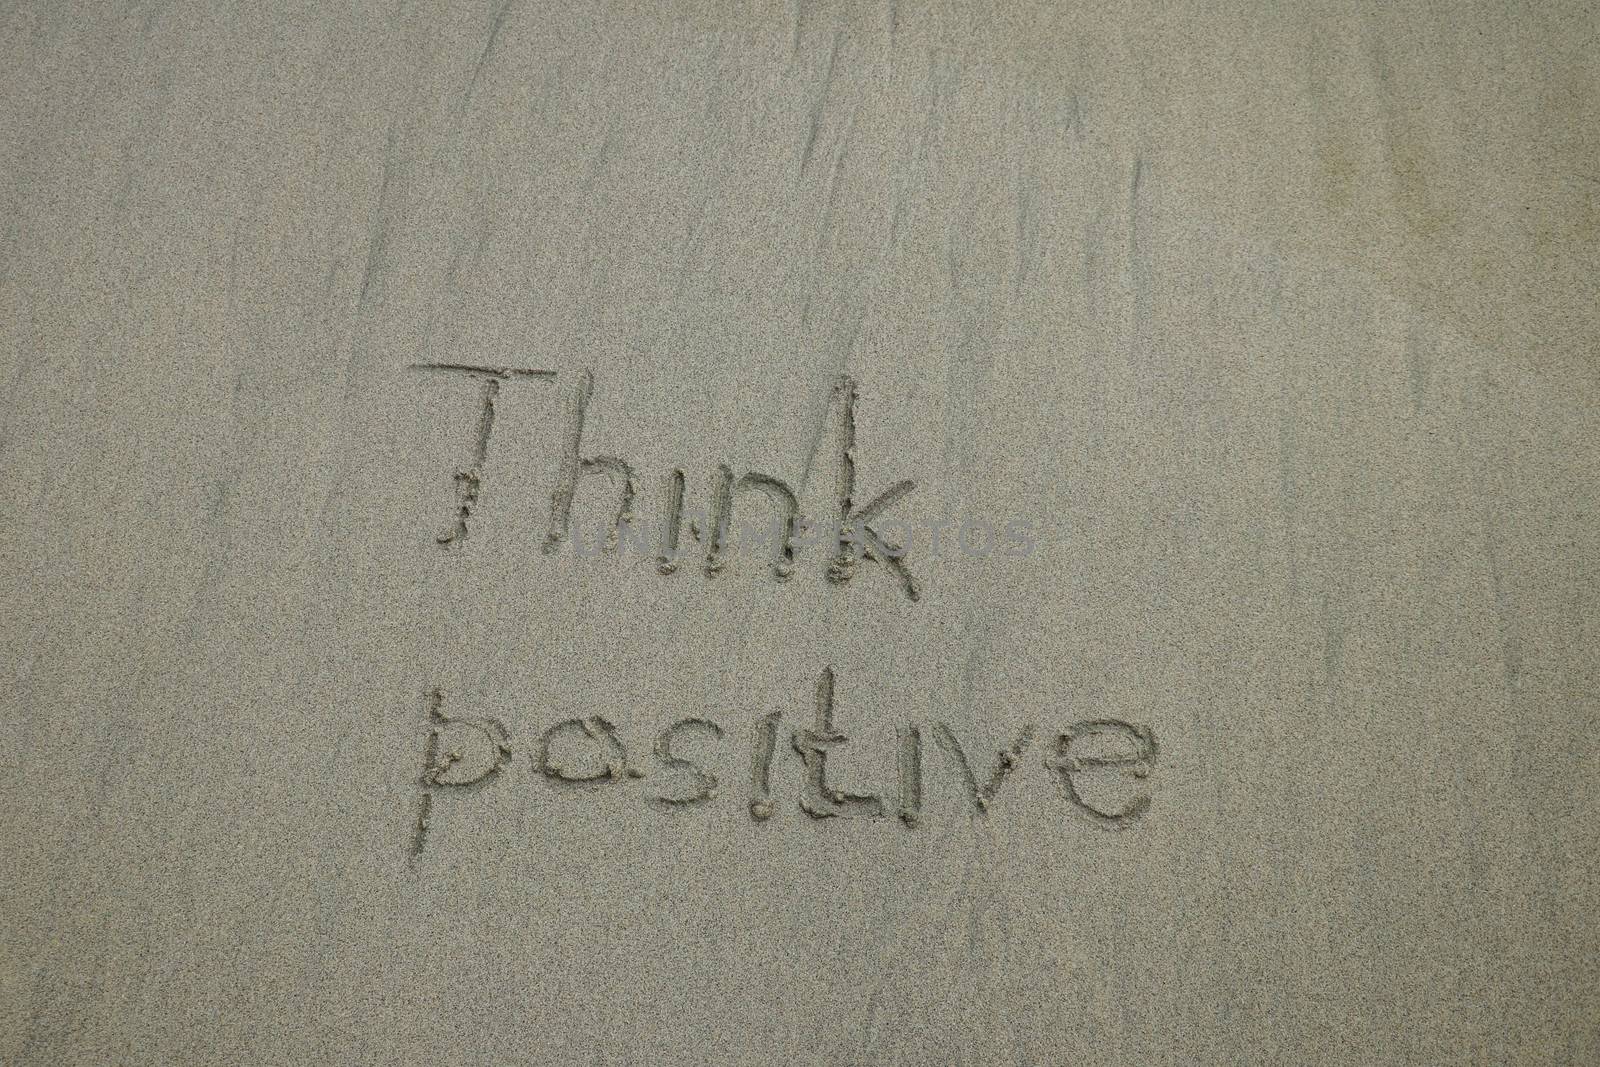 think positive written on the sand beach - positive thinking concept.